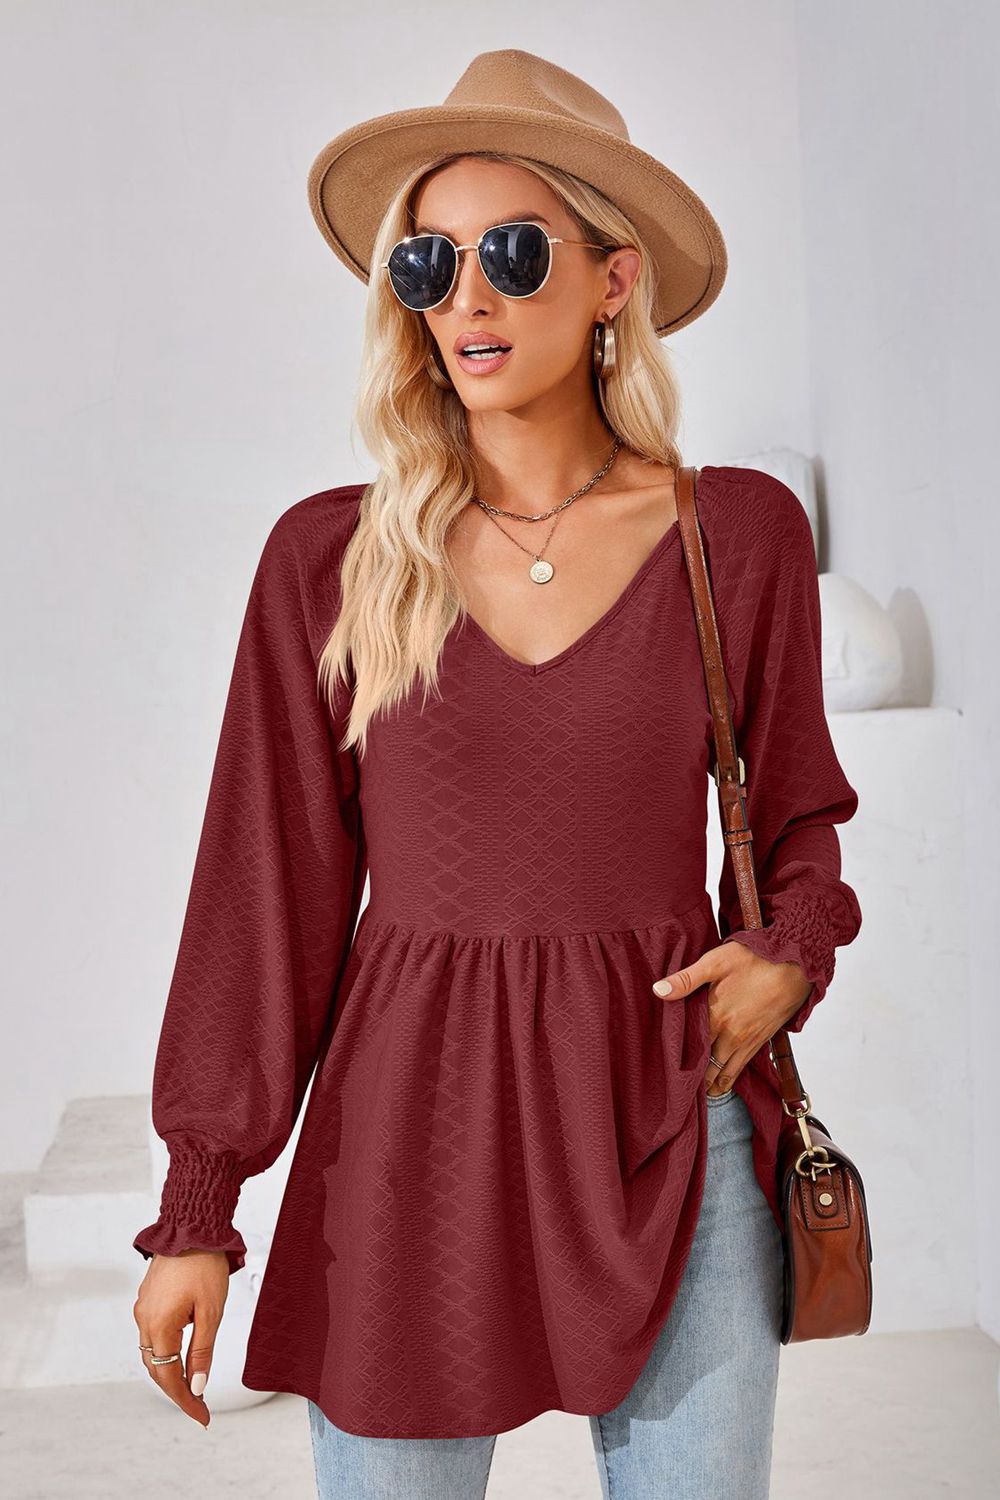 V-Neck Lantern Sleeve Blouse - Red / S - Women’s Clothing & Accessories - Shirts & Tops - 16 - 2024